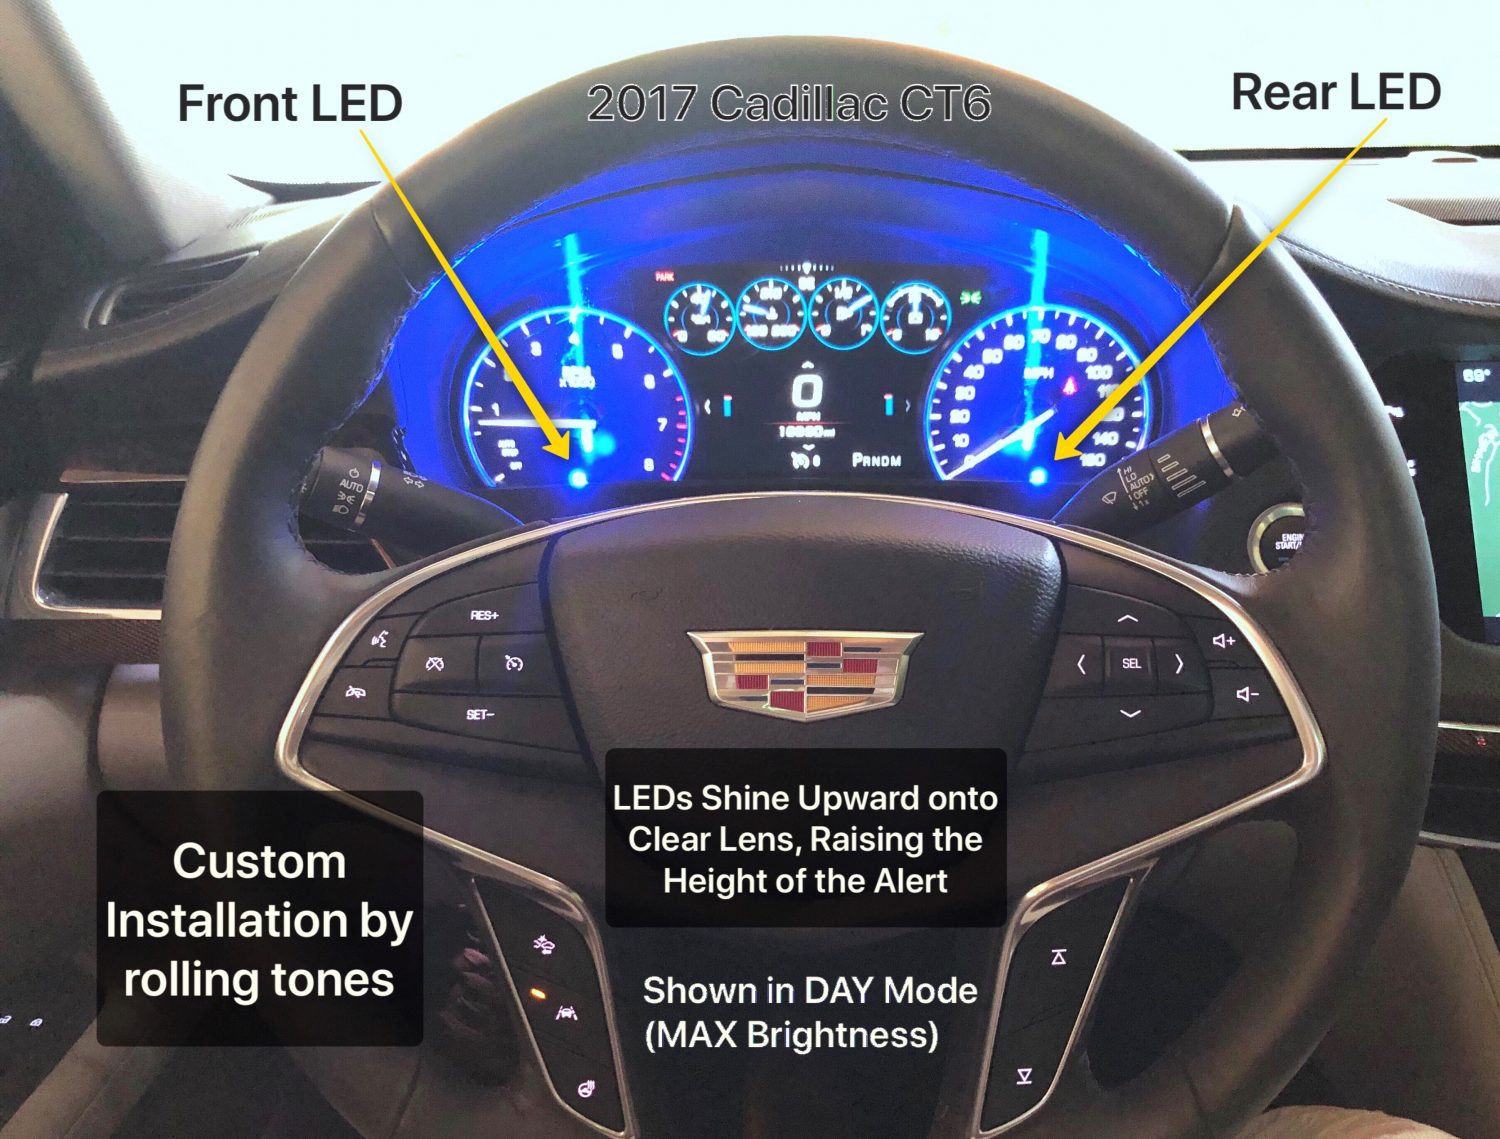 K40 radar detector and laser jammers on a Cadillac CT6